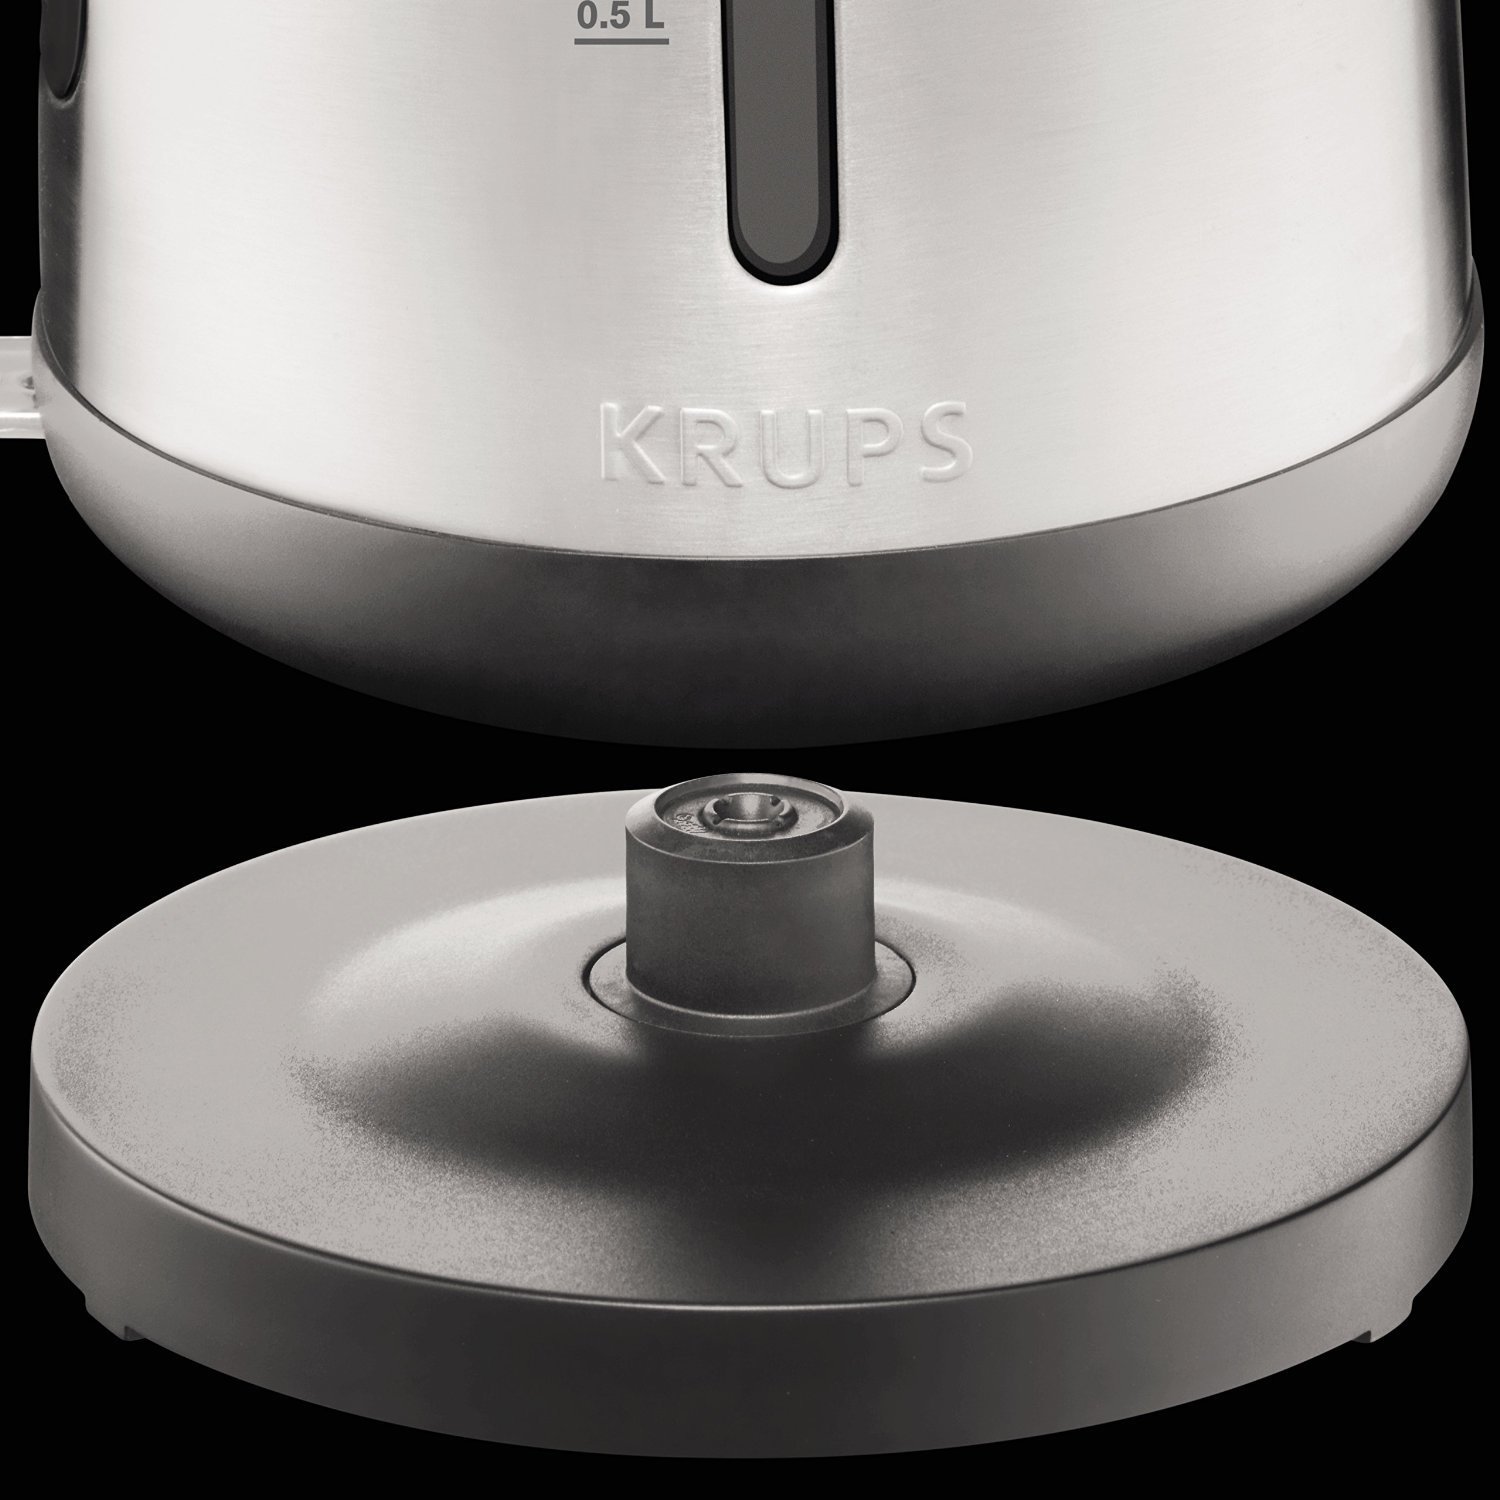 https://ak1.ostkcdn.com/images/products/11930438/Krups-BW442D50-Control-Line-Electric-Kettle-with-Auto-Shut-Off-and-Stainless-Steel-Housing-1.7-Liter-Silver-b09e4973-e74e-42da-9b85-ff2714503592.jpg